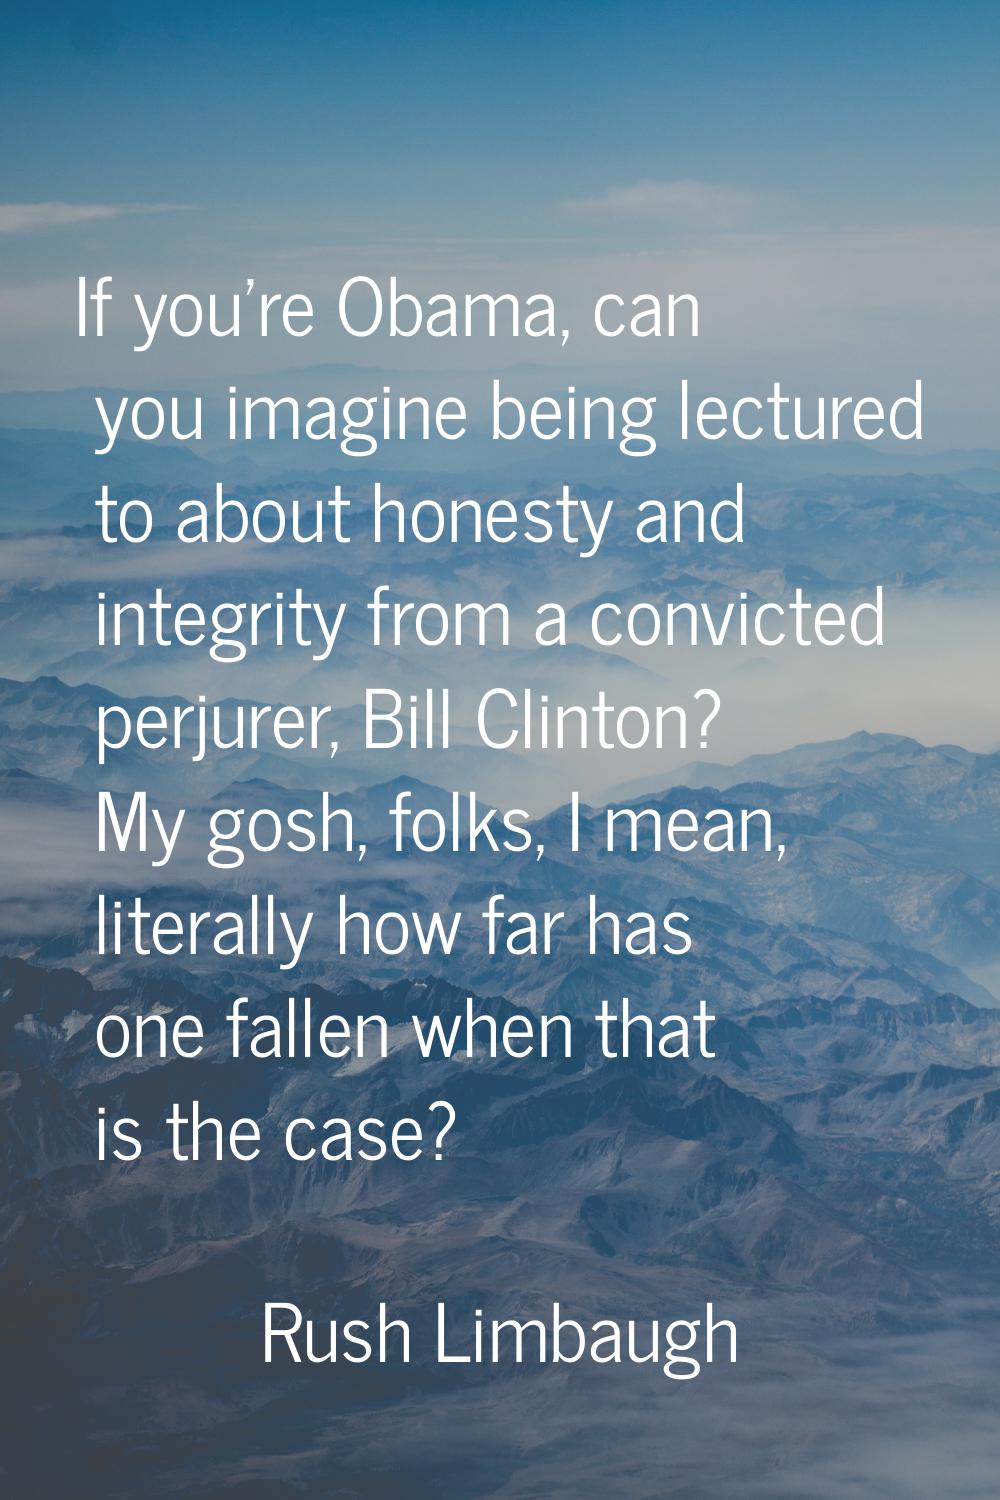 If you're Obama, can you imagine being lectured to about honesty and integrity from a convicted per